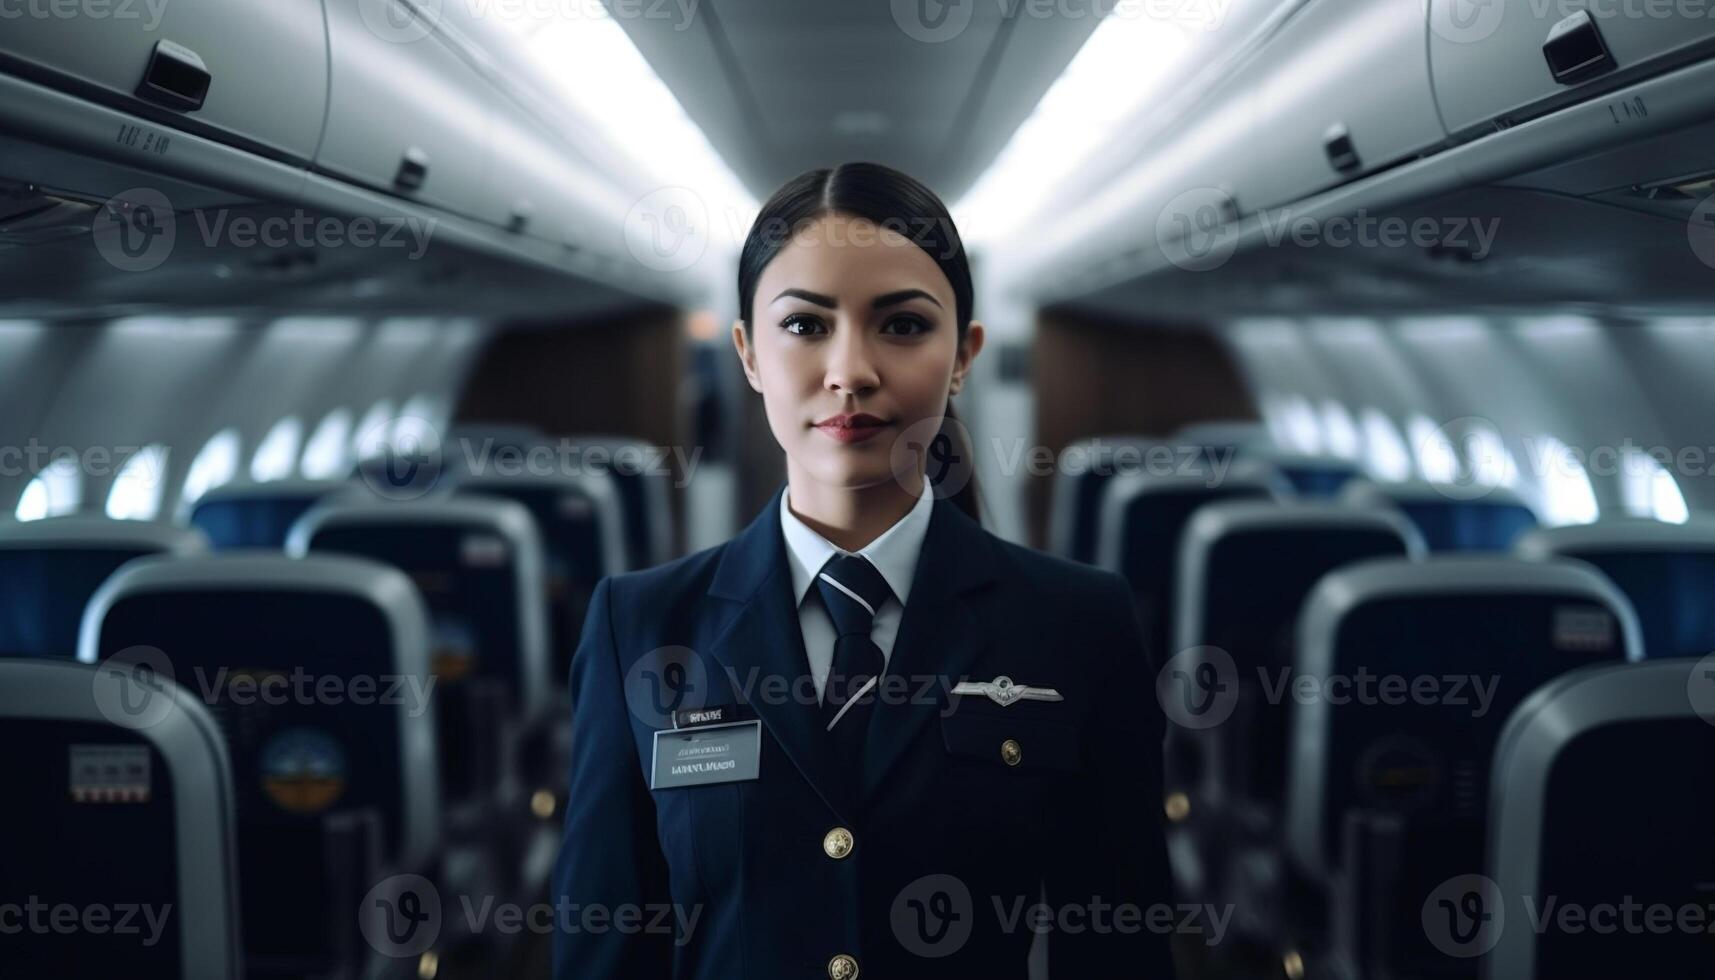 Young businesswoman smiling confidently inside commercial airplane with cabin crew generated by AI photo